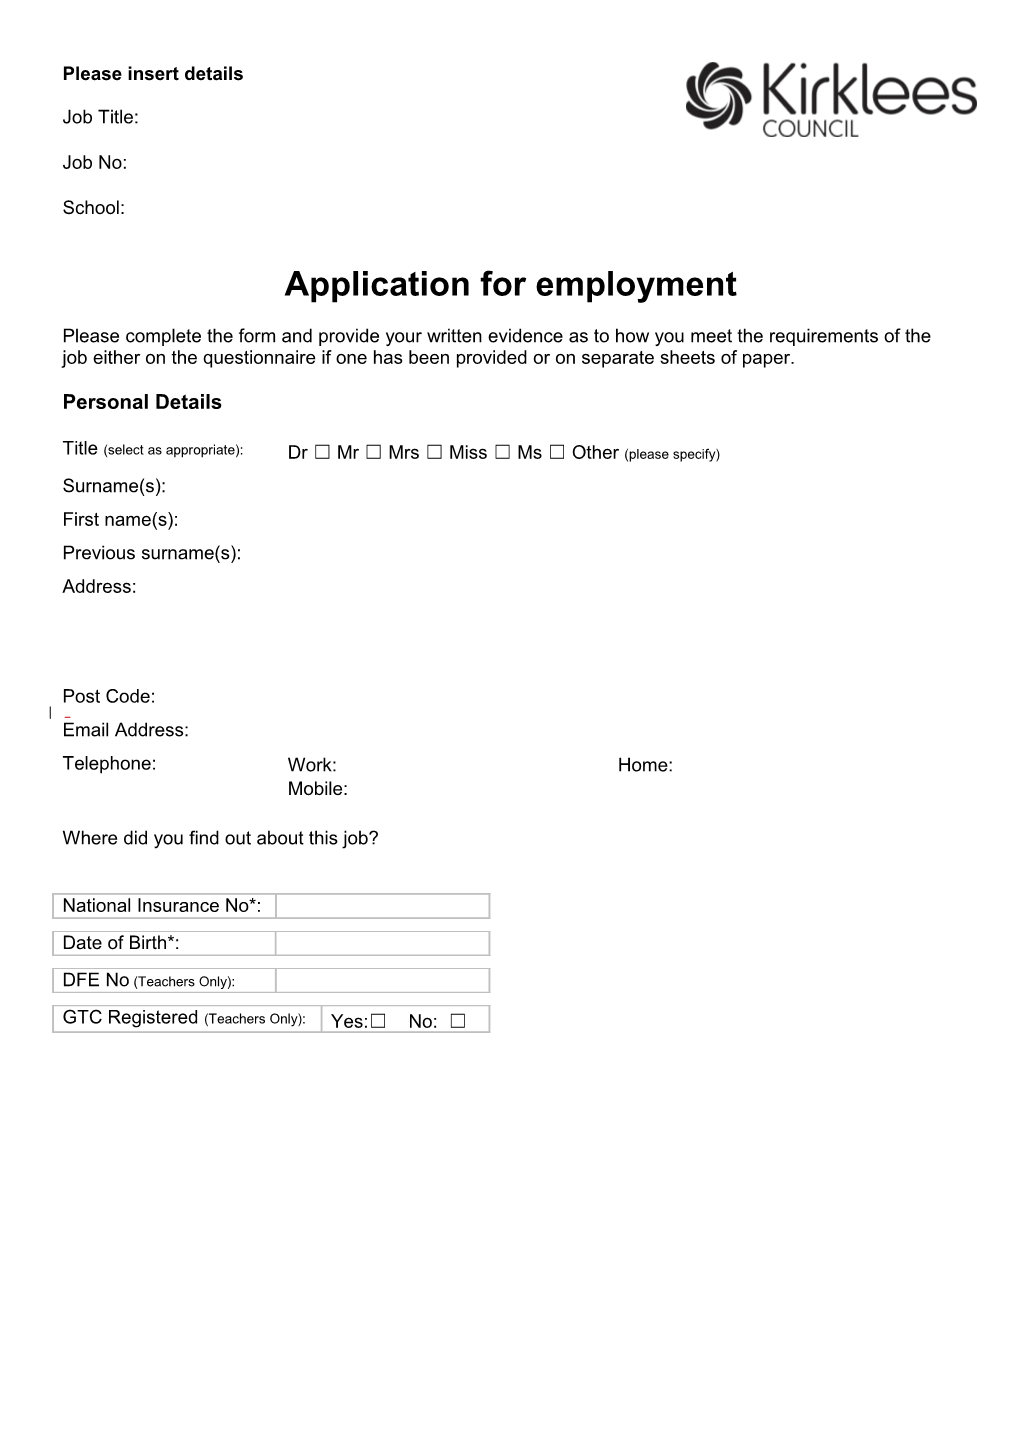 Application Form for Employment s1